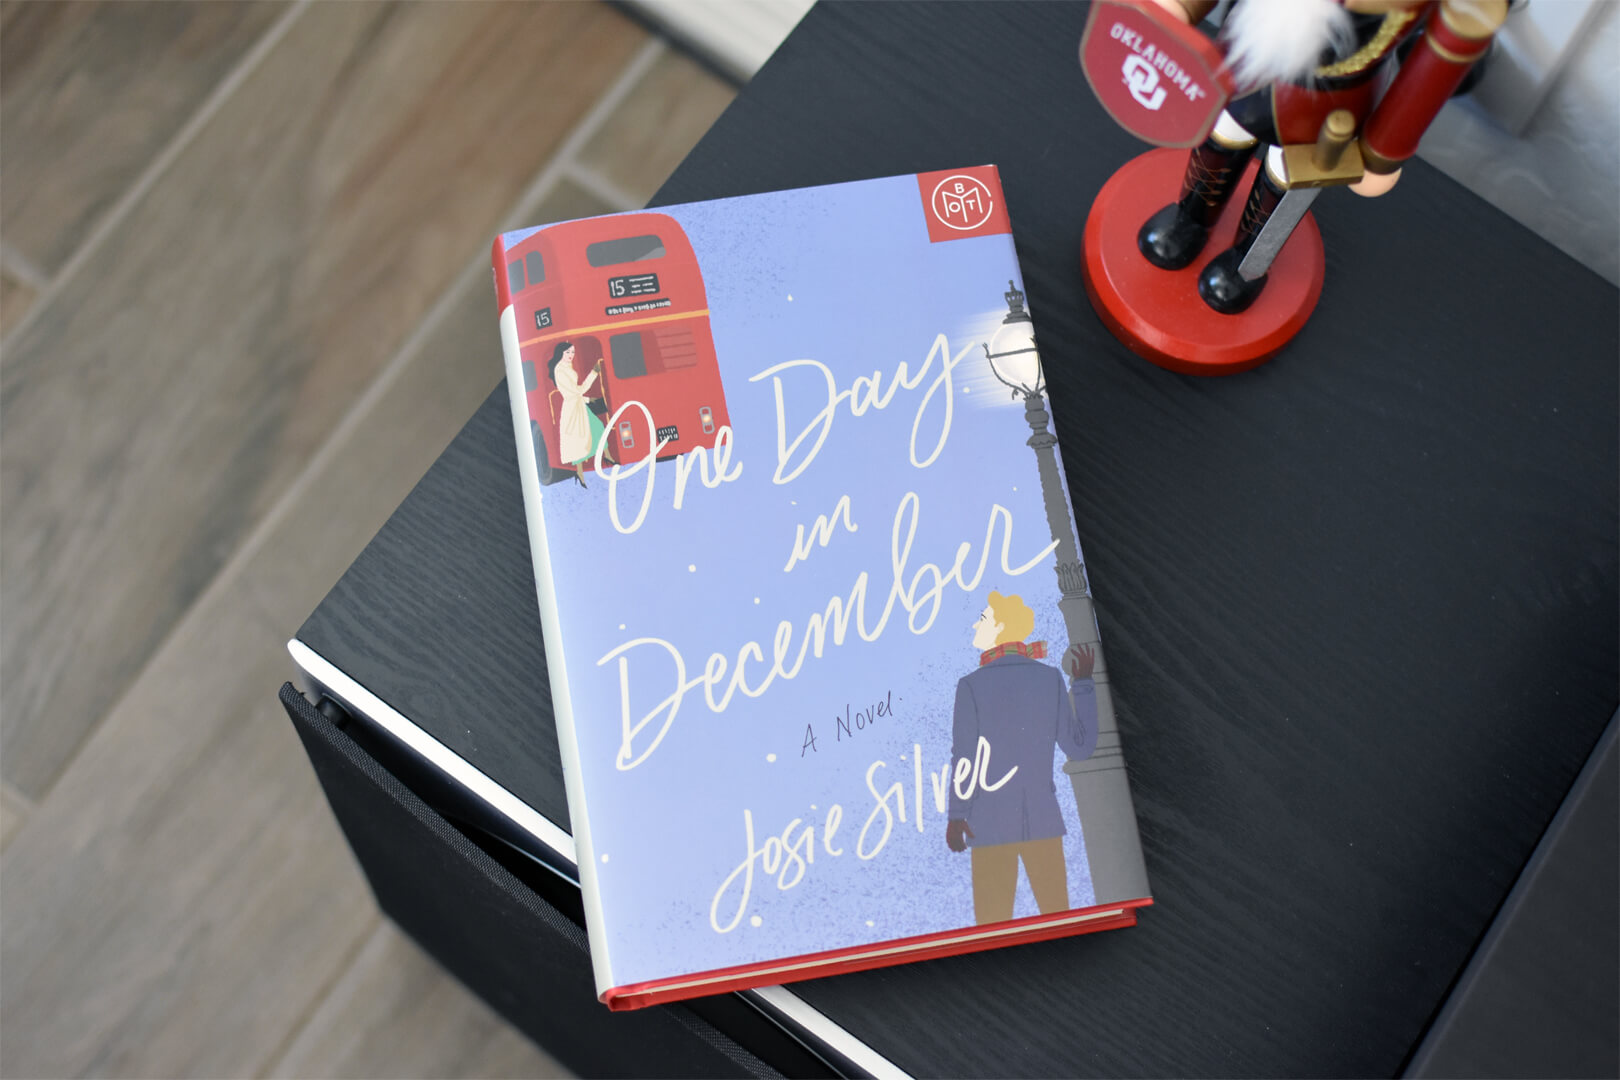 Review: One Day in December by Josie Silver